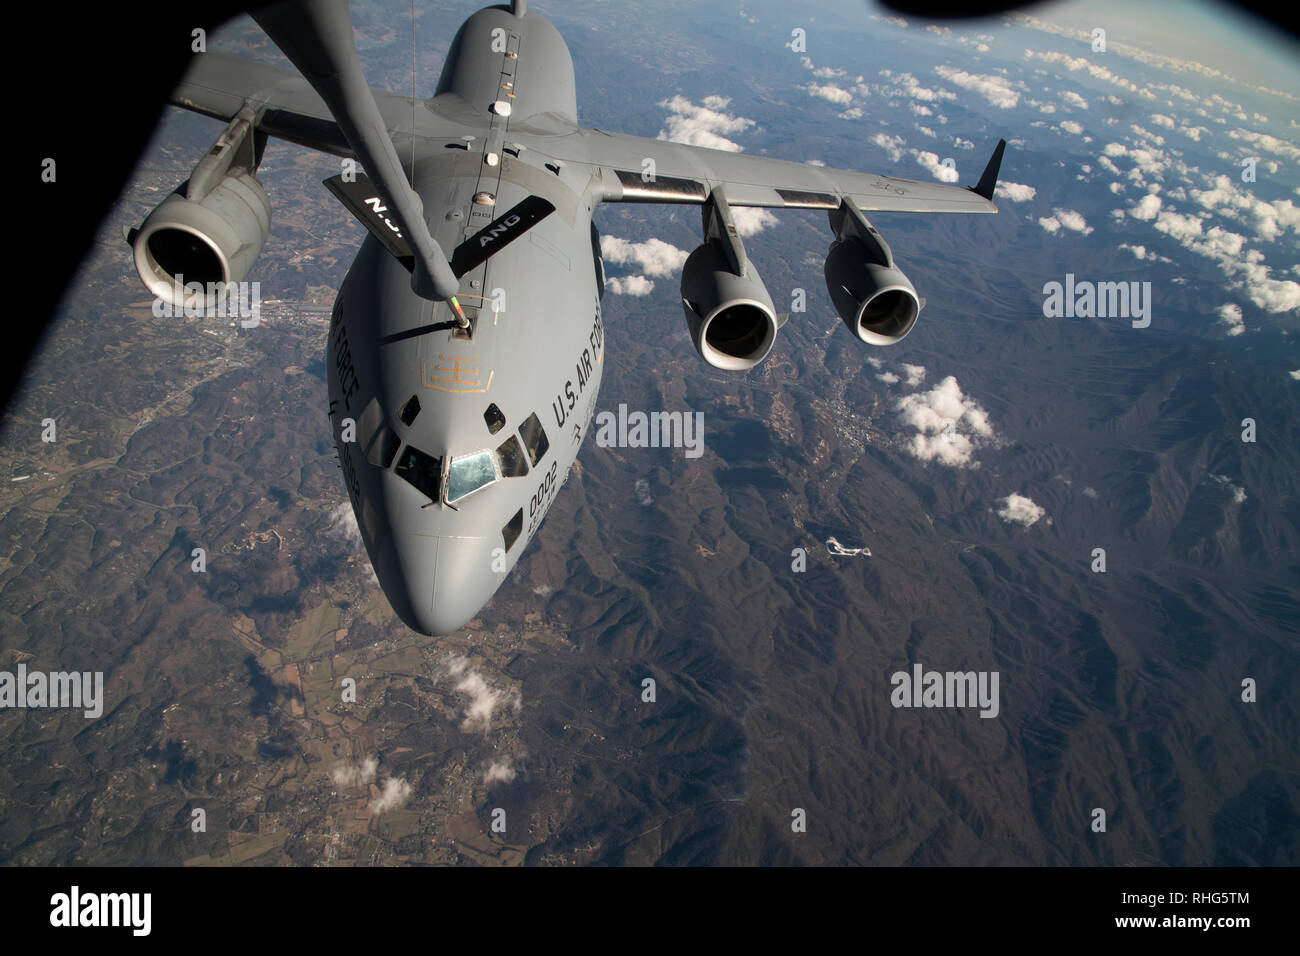 A C-17 Globemaster III from Joint Base Charleston, S.C.,  gets refueled by a KC-135R Stratotanker from Joint Base McGuire-Dix-Lakehurst, N.J., over the continental U.S., Jan. 28, 2019. The KC-135R Stratotanker is flown by the 141st Air Refueling Squadron from the 108th Wing, New Jersey Air National Guard. (U.S. Air National Guard photo by Senior Julia Santiago) Stock Photo